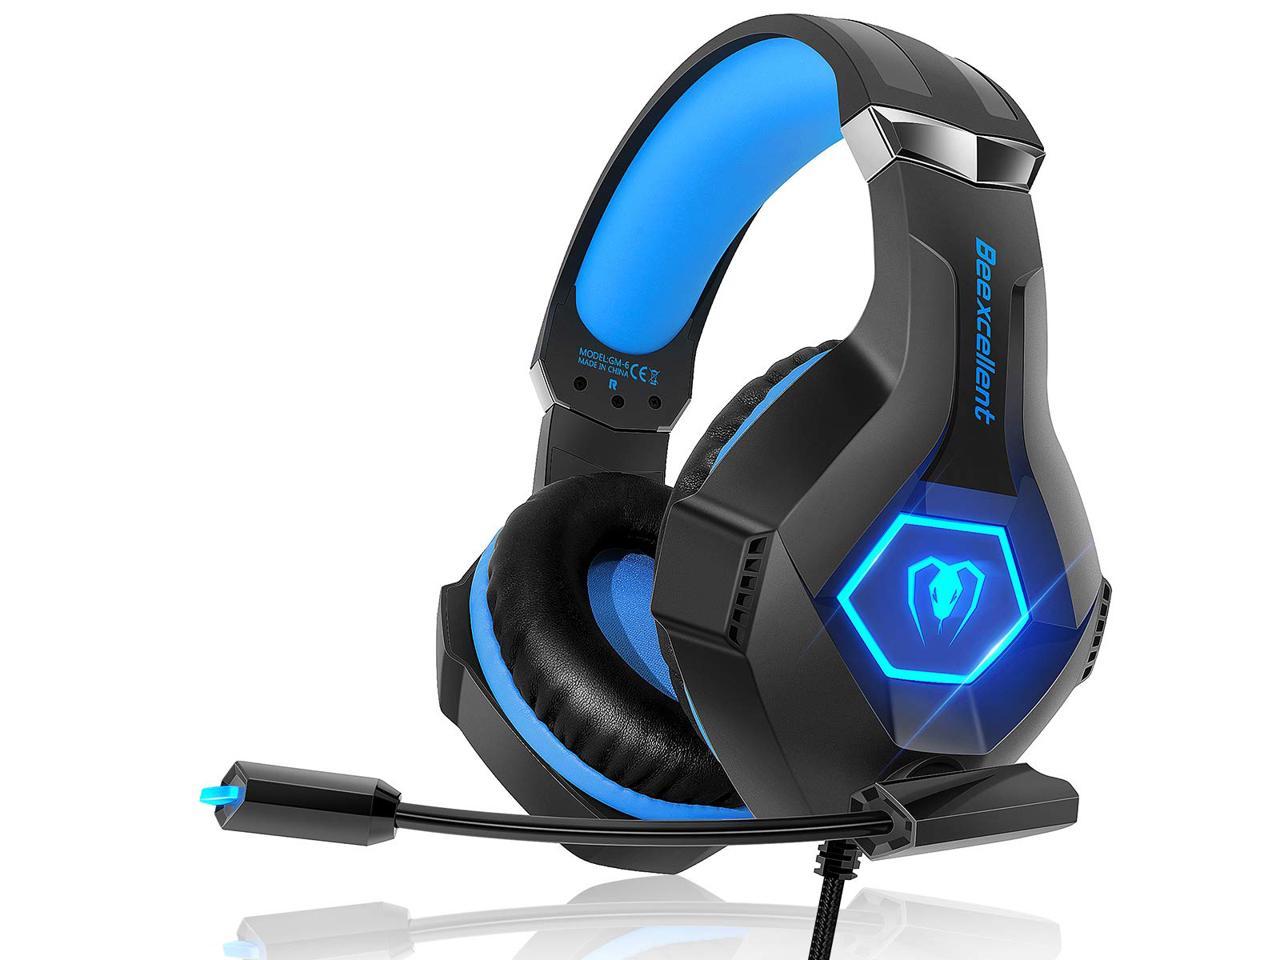 Gaming Headset for PS4 iKiKin Xbox One Headset with Mic, Stereo Surround Sound Noise Canceling Deep Bass LED Light, Wired Over Ear Gaming Headphones for PC iPad Laptop (Blue)